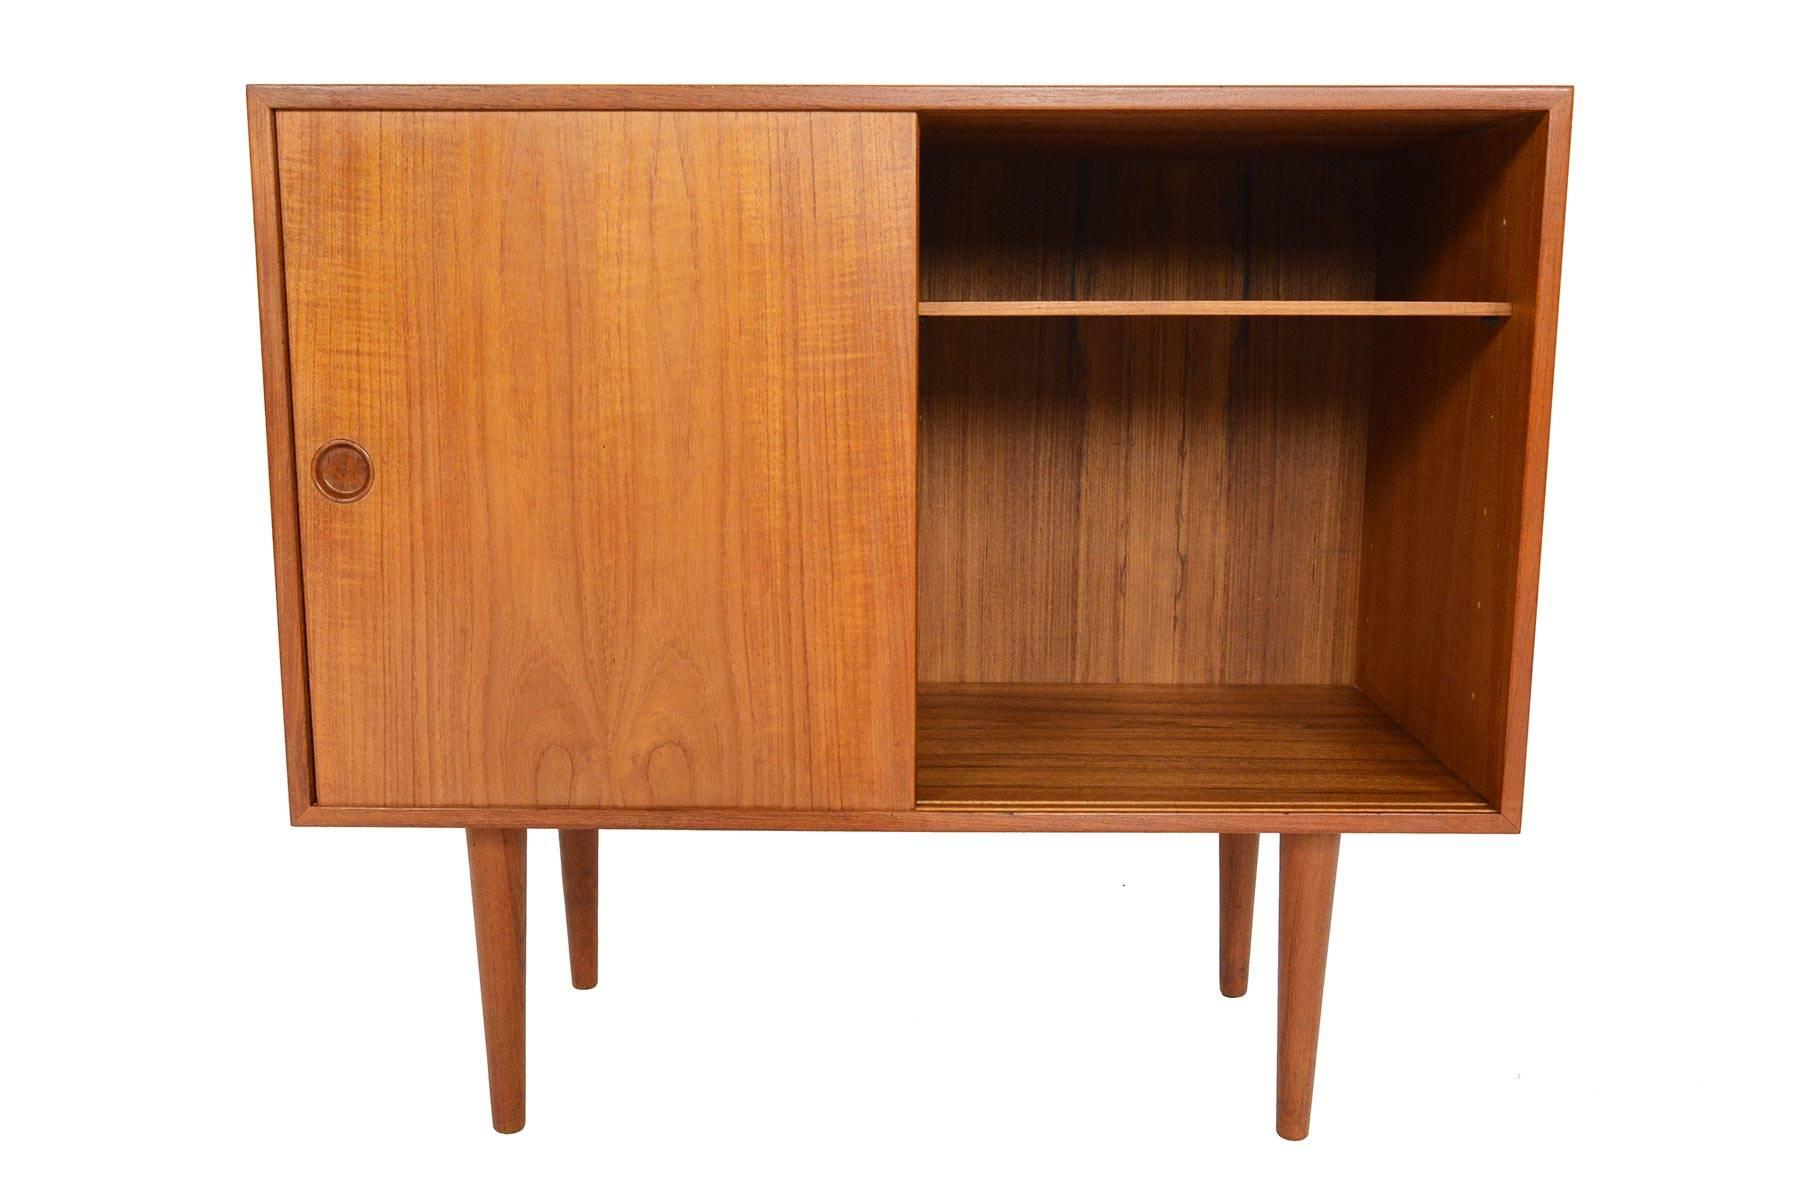 This beautiful small two-door credenza in teak was designed by Kai Kristiansen for Feldballes Møbelfabrik in the 1960s. Two sliding doors open to reveal two bays with an adjustable shelf on the right and a felt lined birch flatware drawer on the